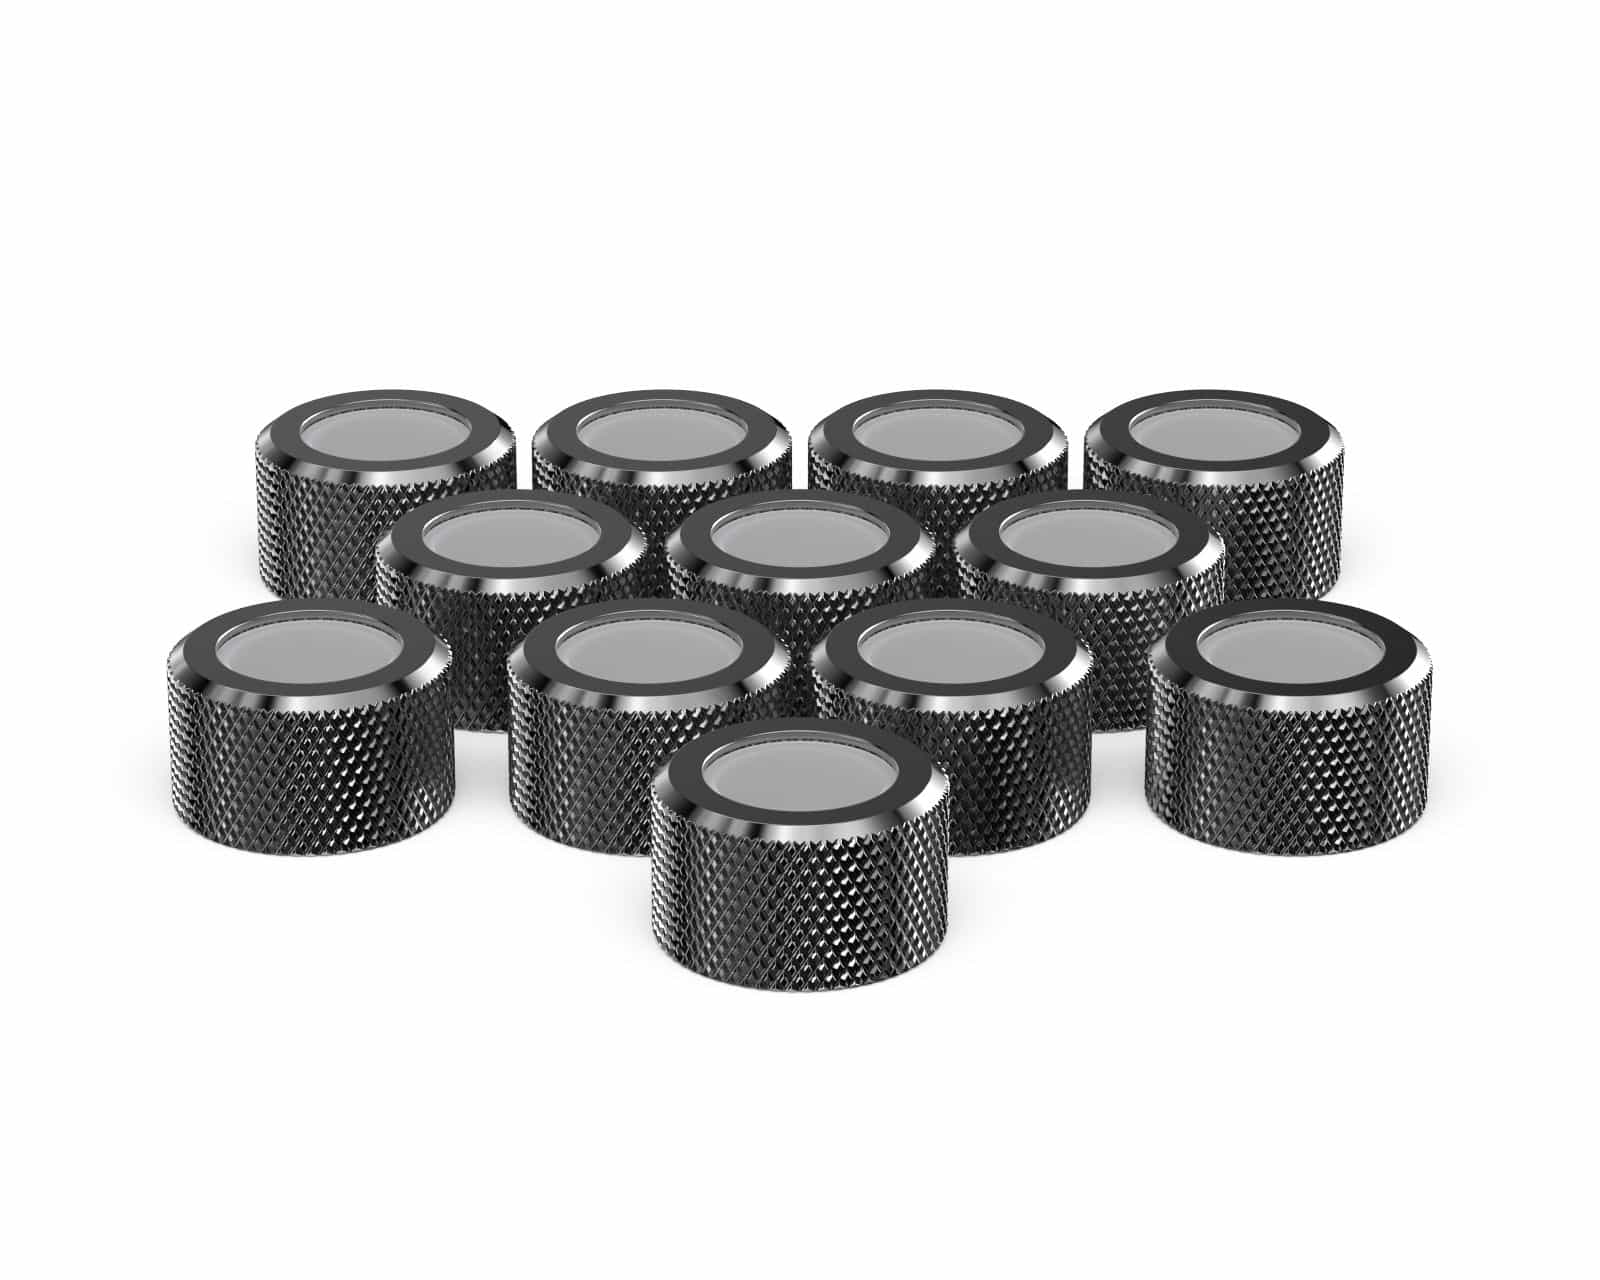 PrimoChill RMSX Replacement Cap Switch Over Kit - 16mm - PrimoChill - KEEPING IT COOL Dark Nickel